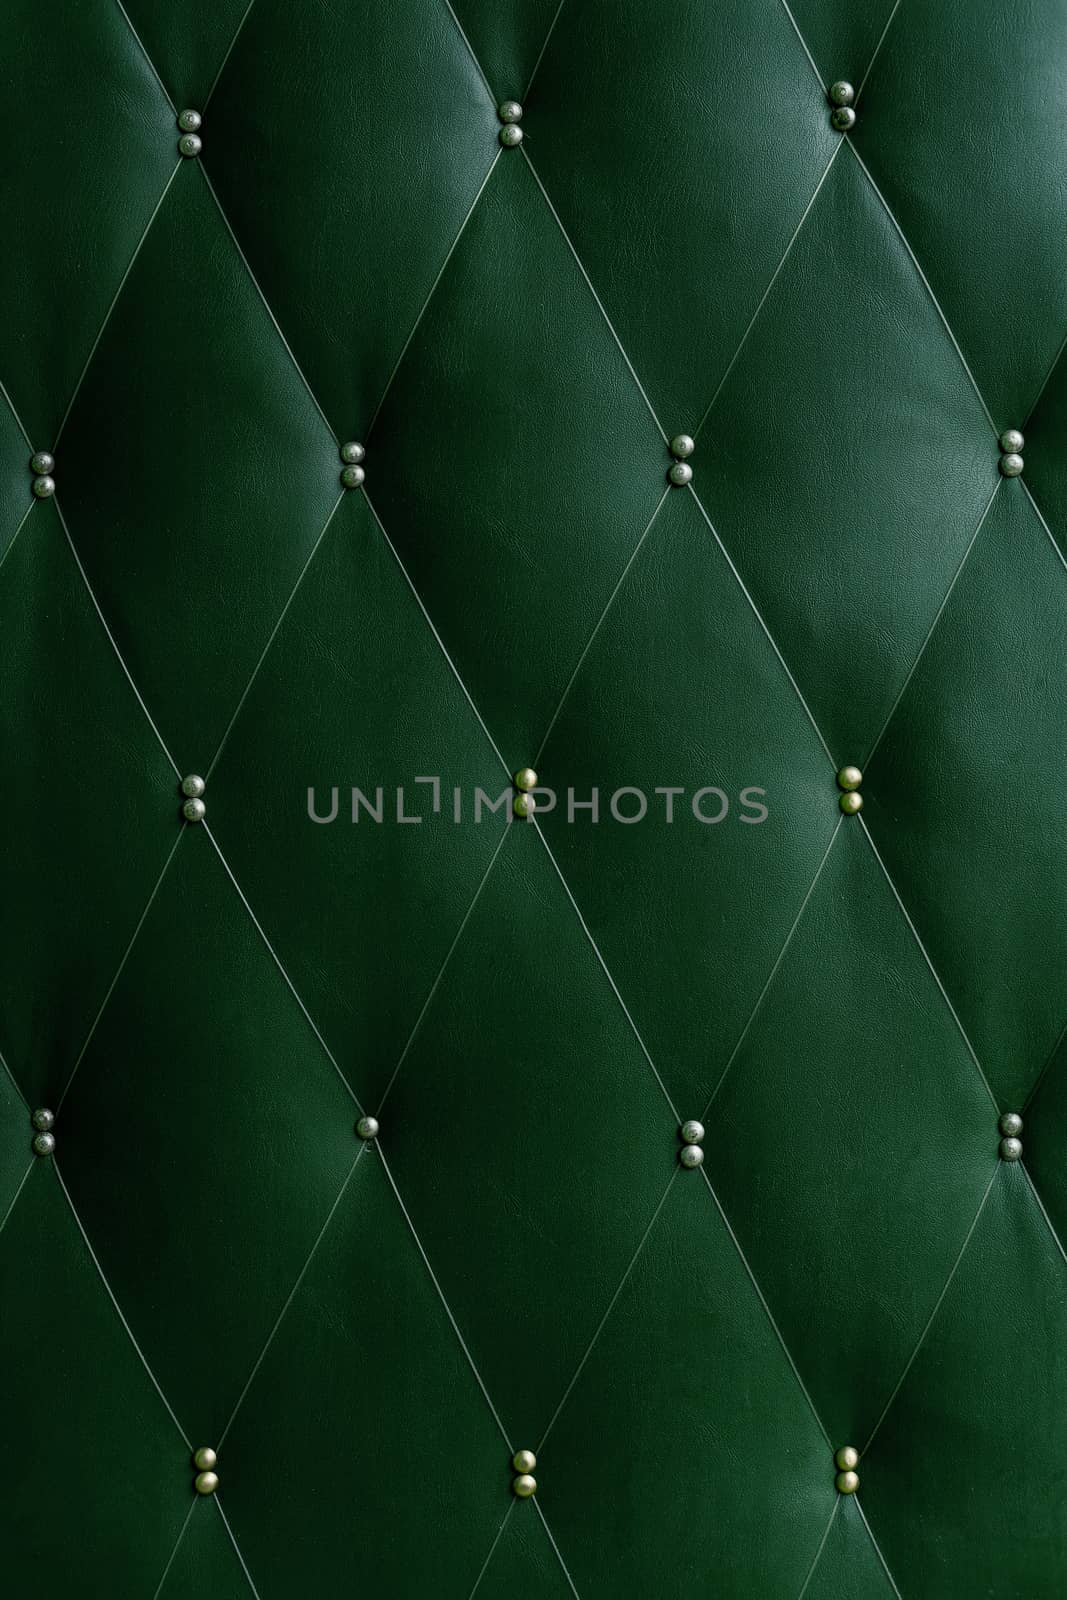 Soviet soft green dermantine front door with a banner of fishing line and nails - full frame background and texture.